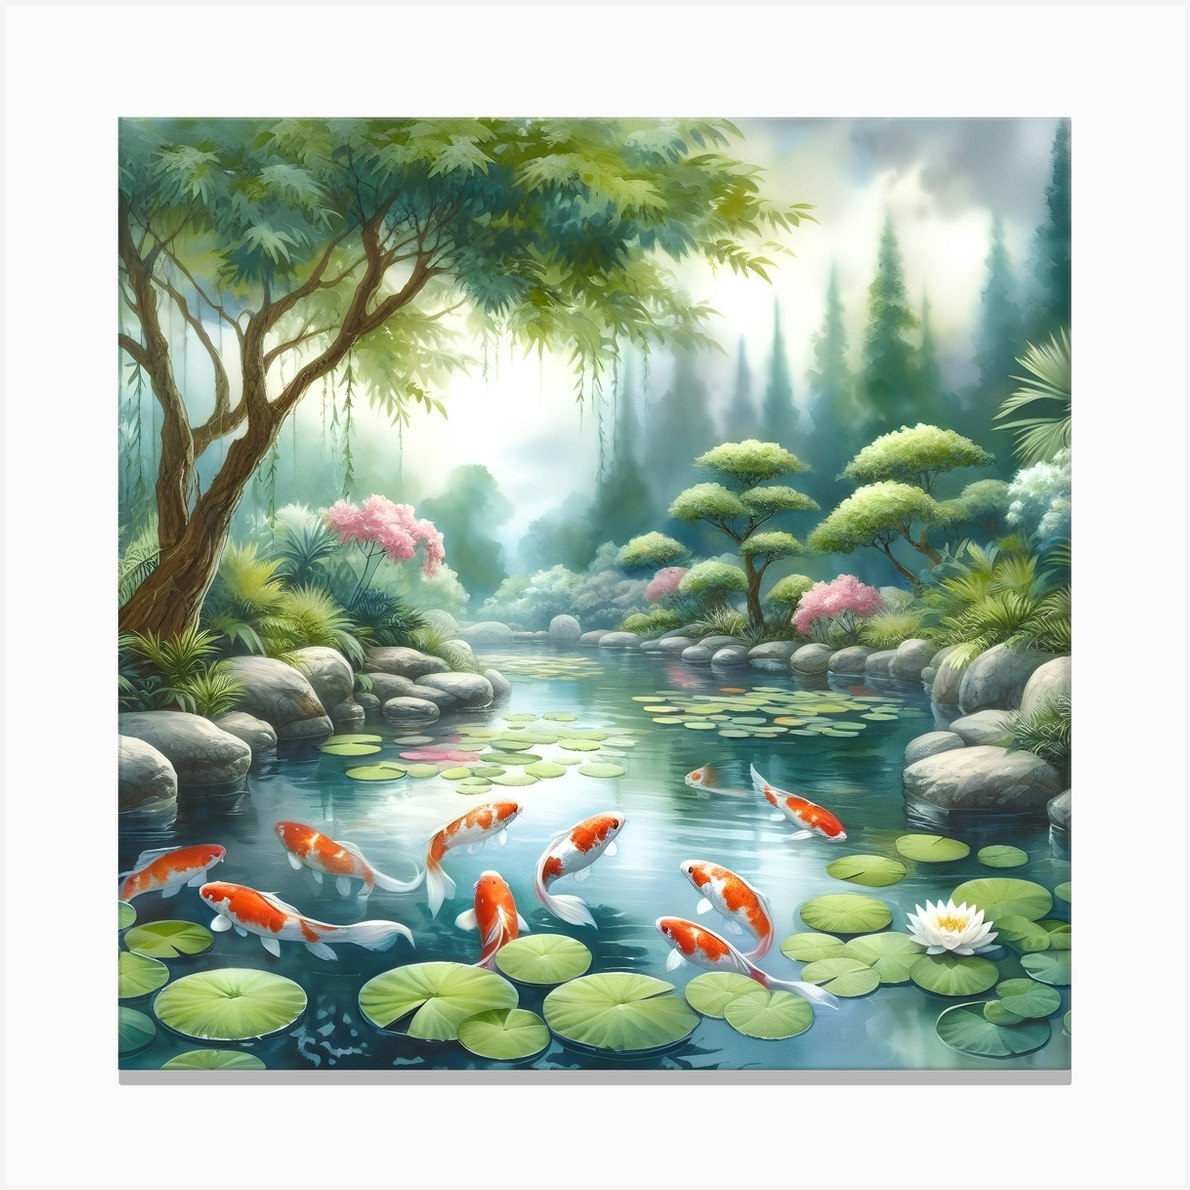 Koi Pond Canvas Print by Smart Gallery - Fy